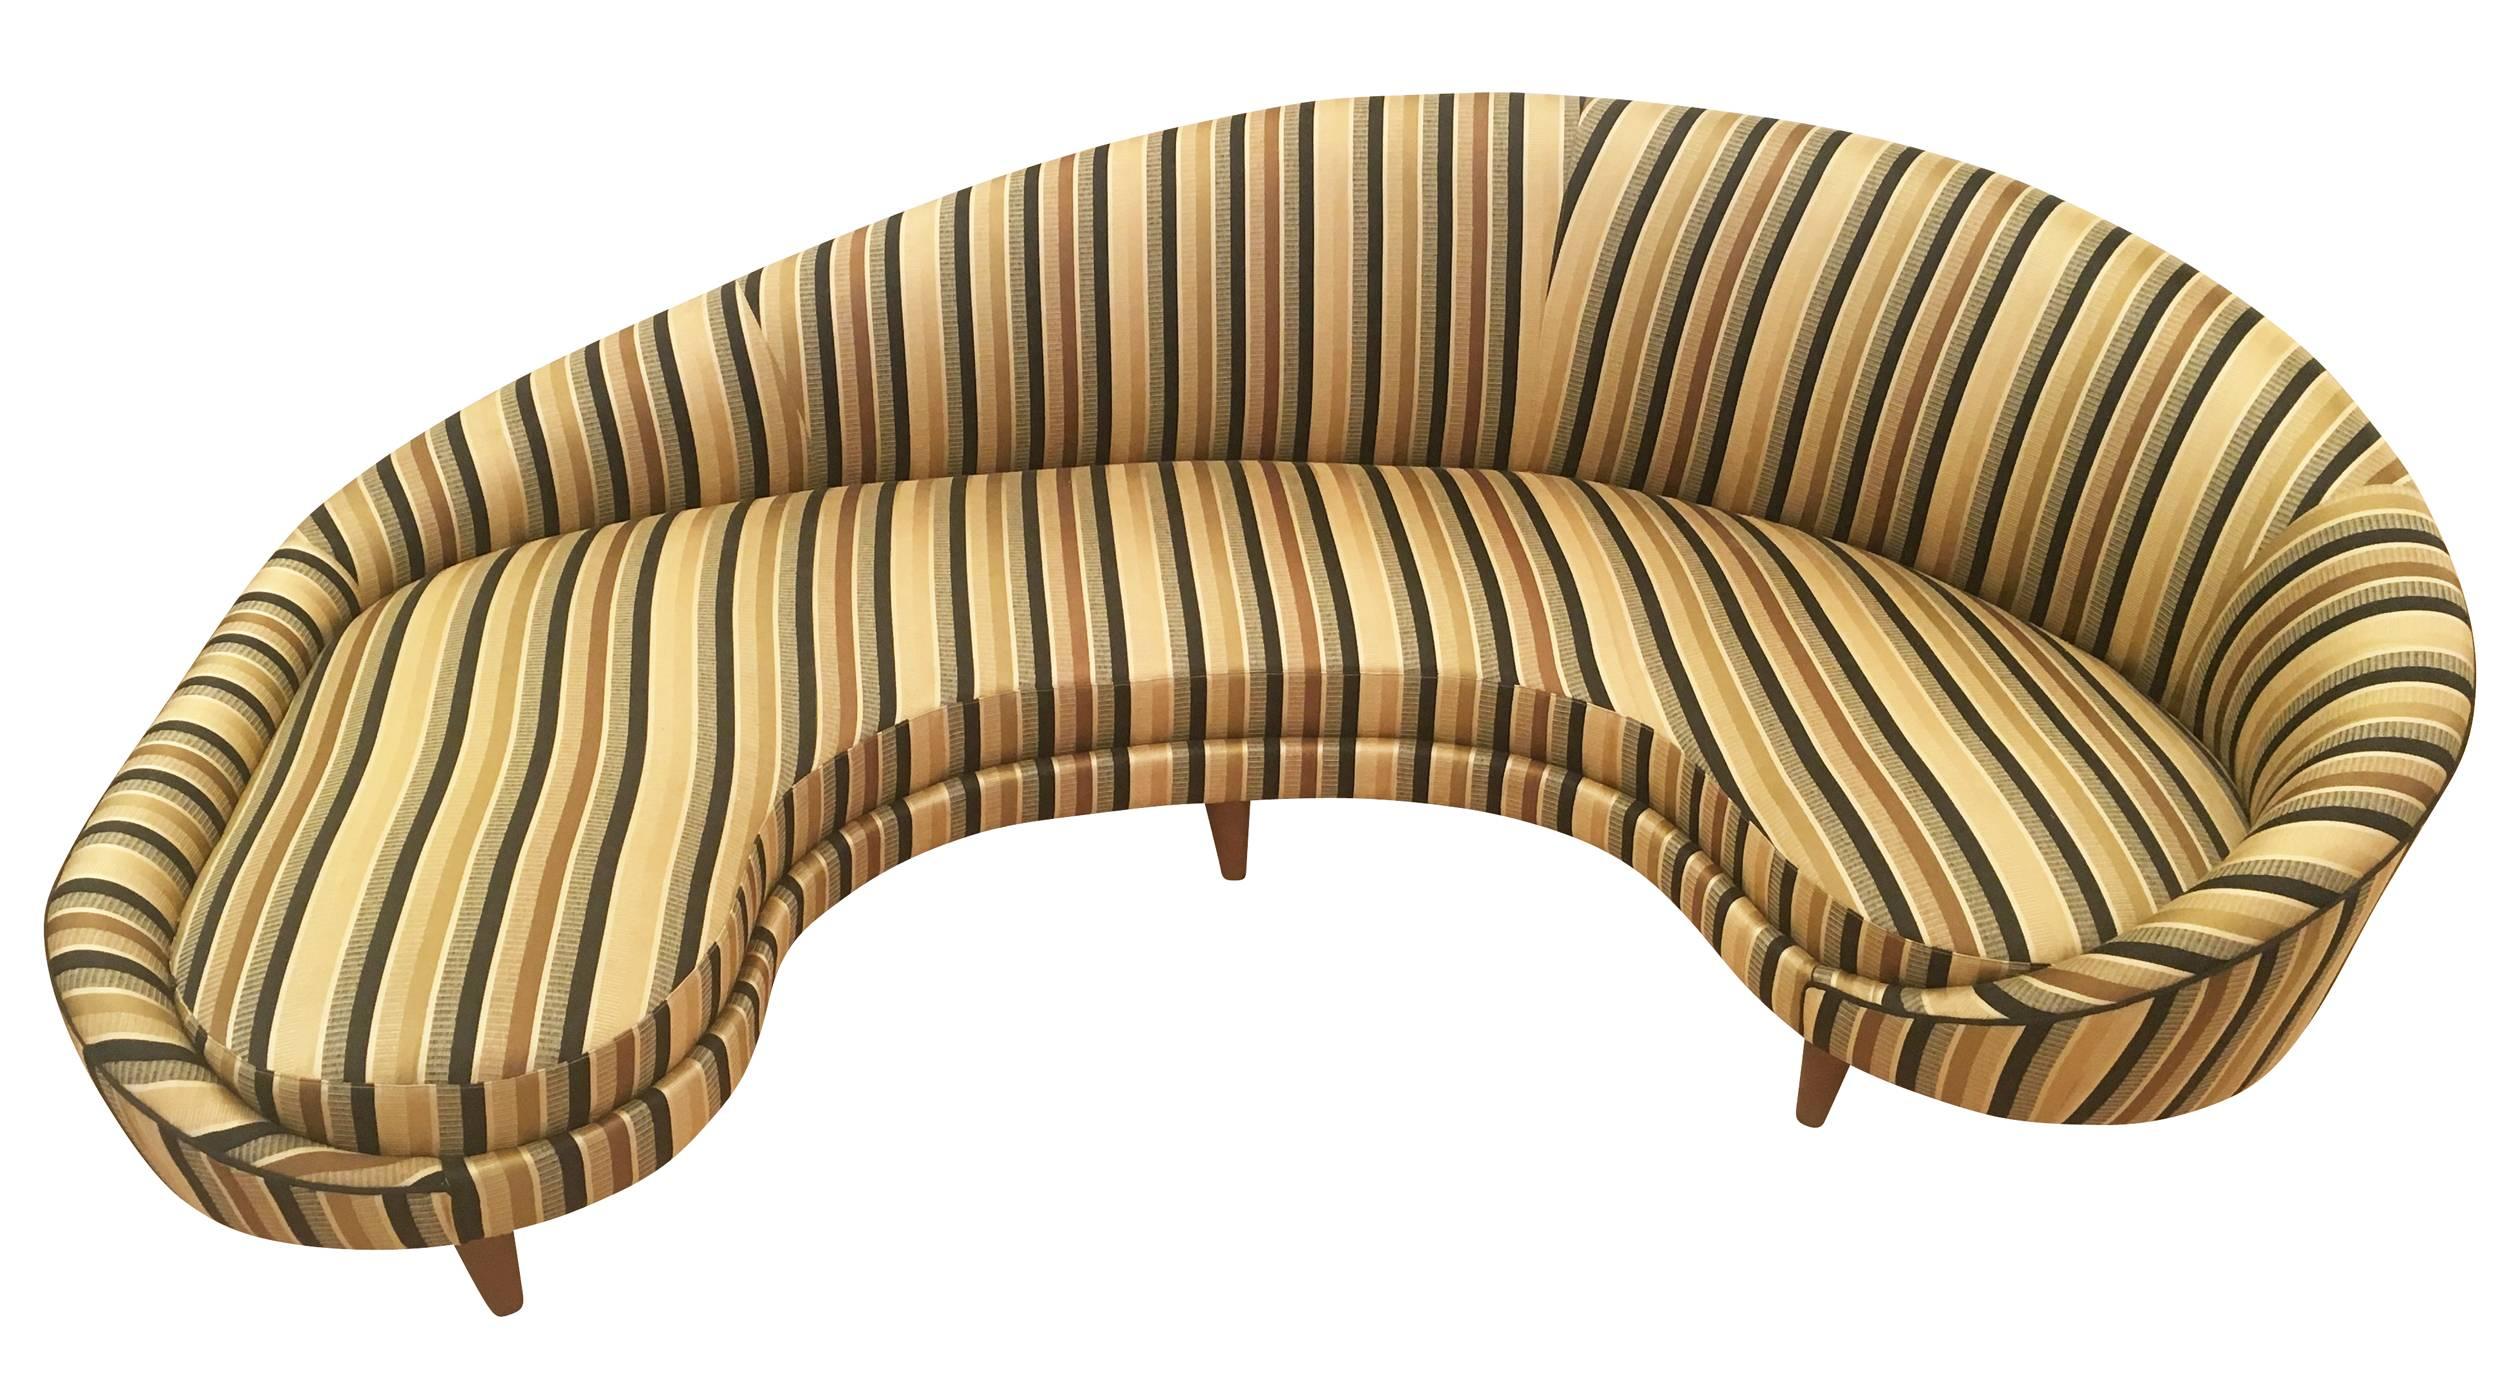 Outstanding curved Italian sofa from the 1960s upholstered in a striped gold fabric. The feet are wood.